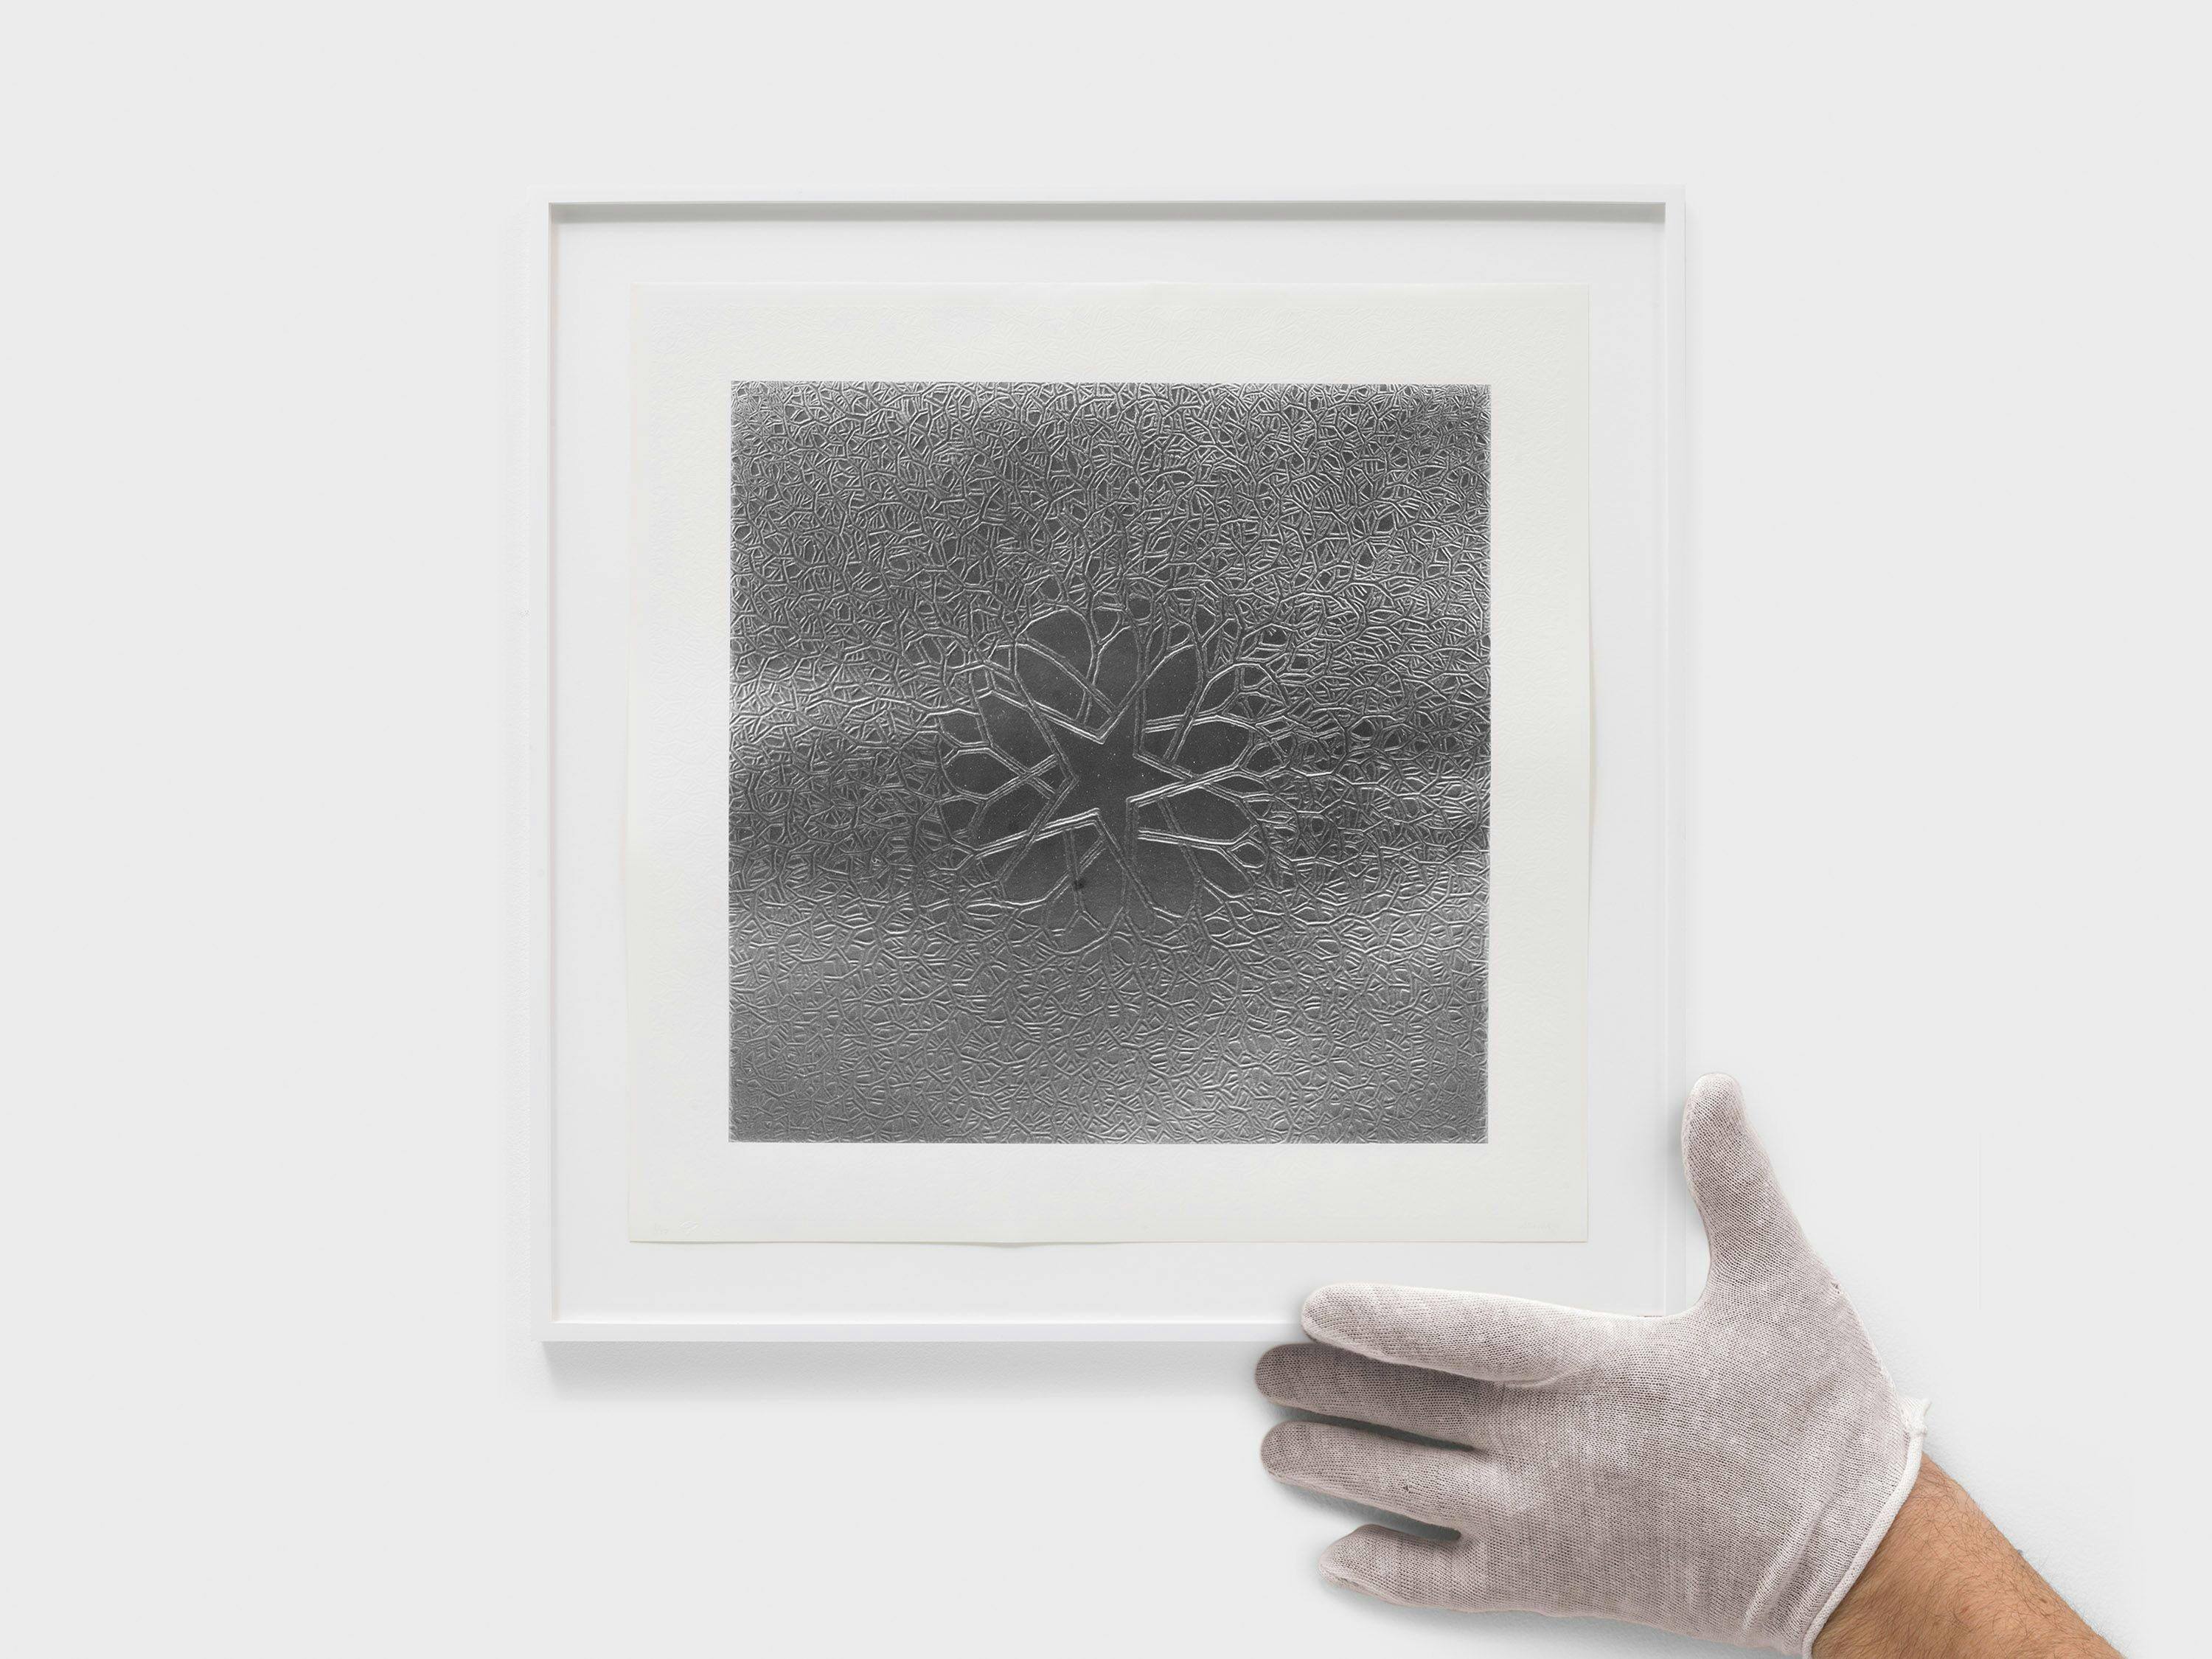 A print by Ruth Asawa, titled Untitled (P.002-I Tied-Wire Sculpture Drawing with Five-Pointed Center Star, Embossed [Silver]), dated 1973.